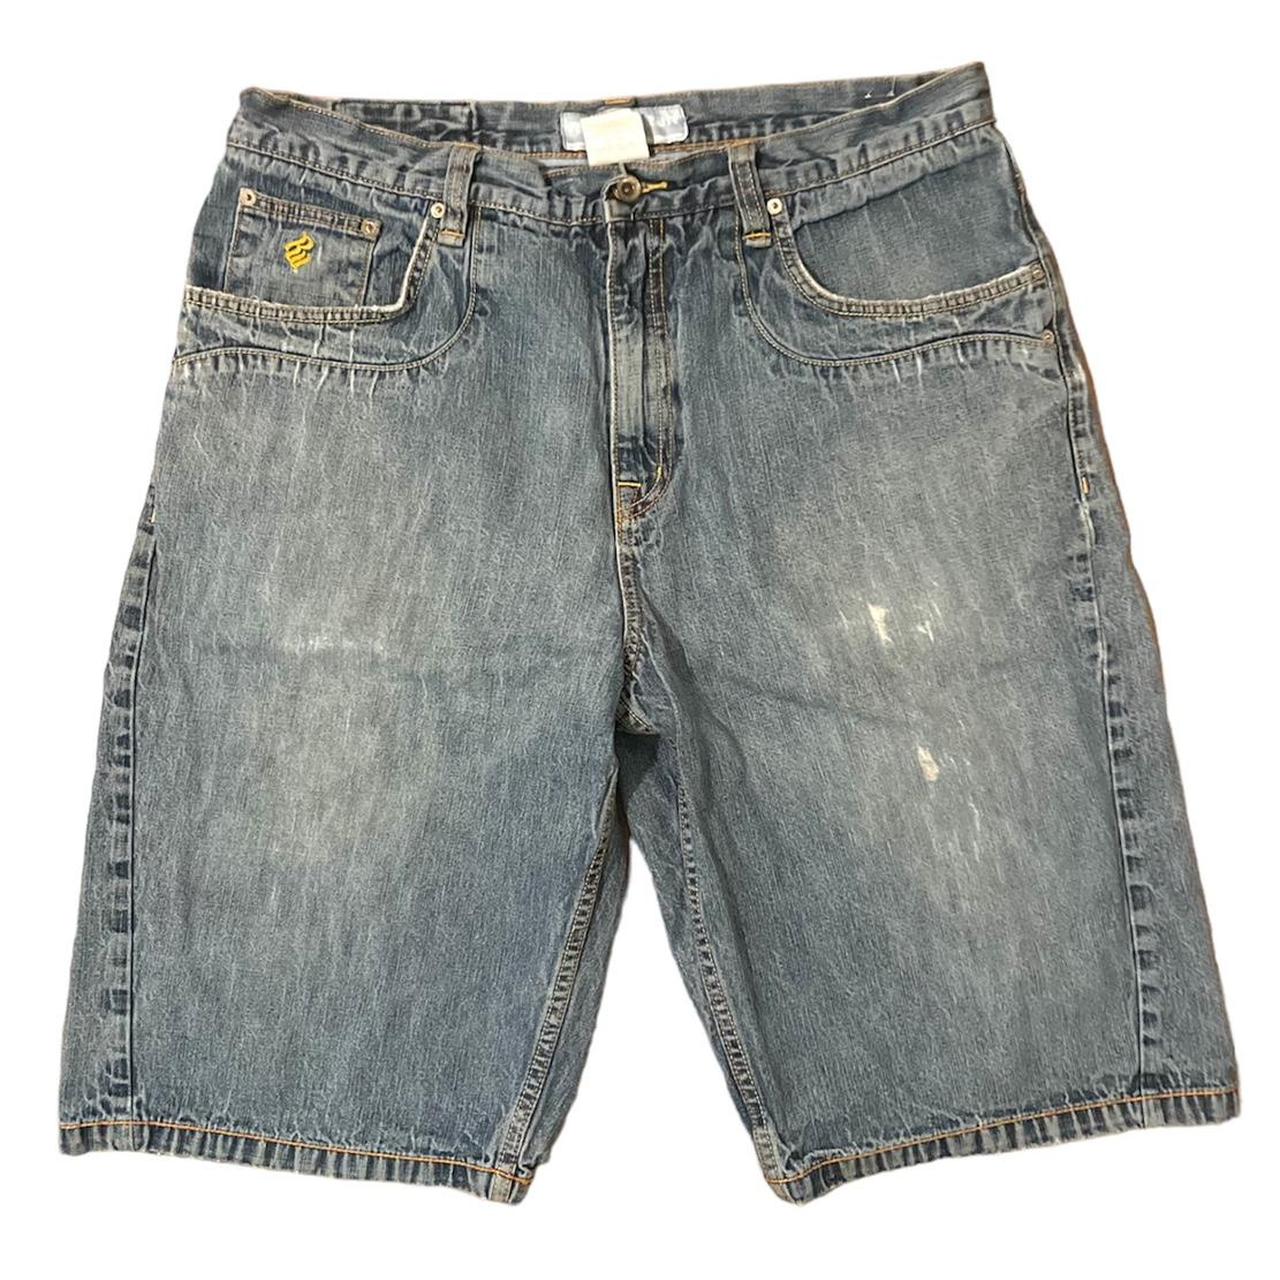 baggy early 2000s rocawear jorts size 38 - dm for... - Depop